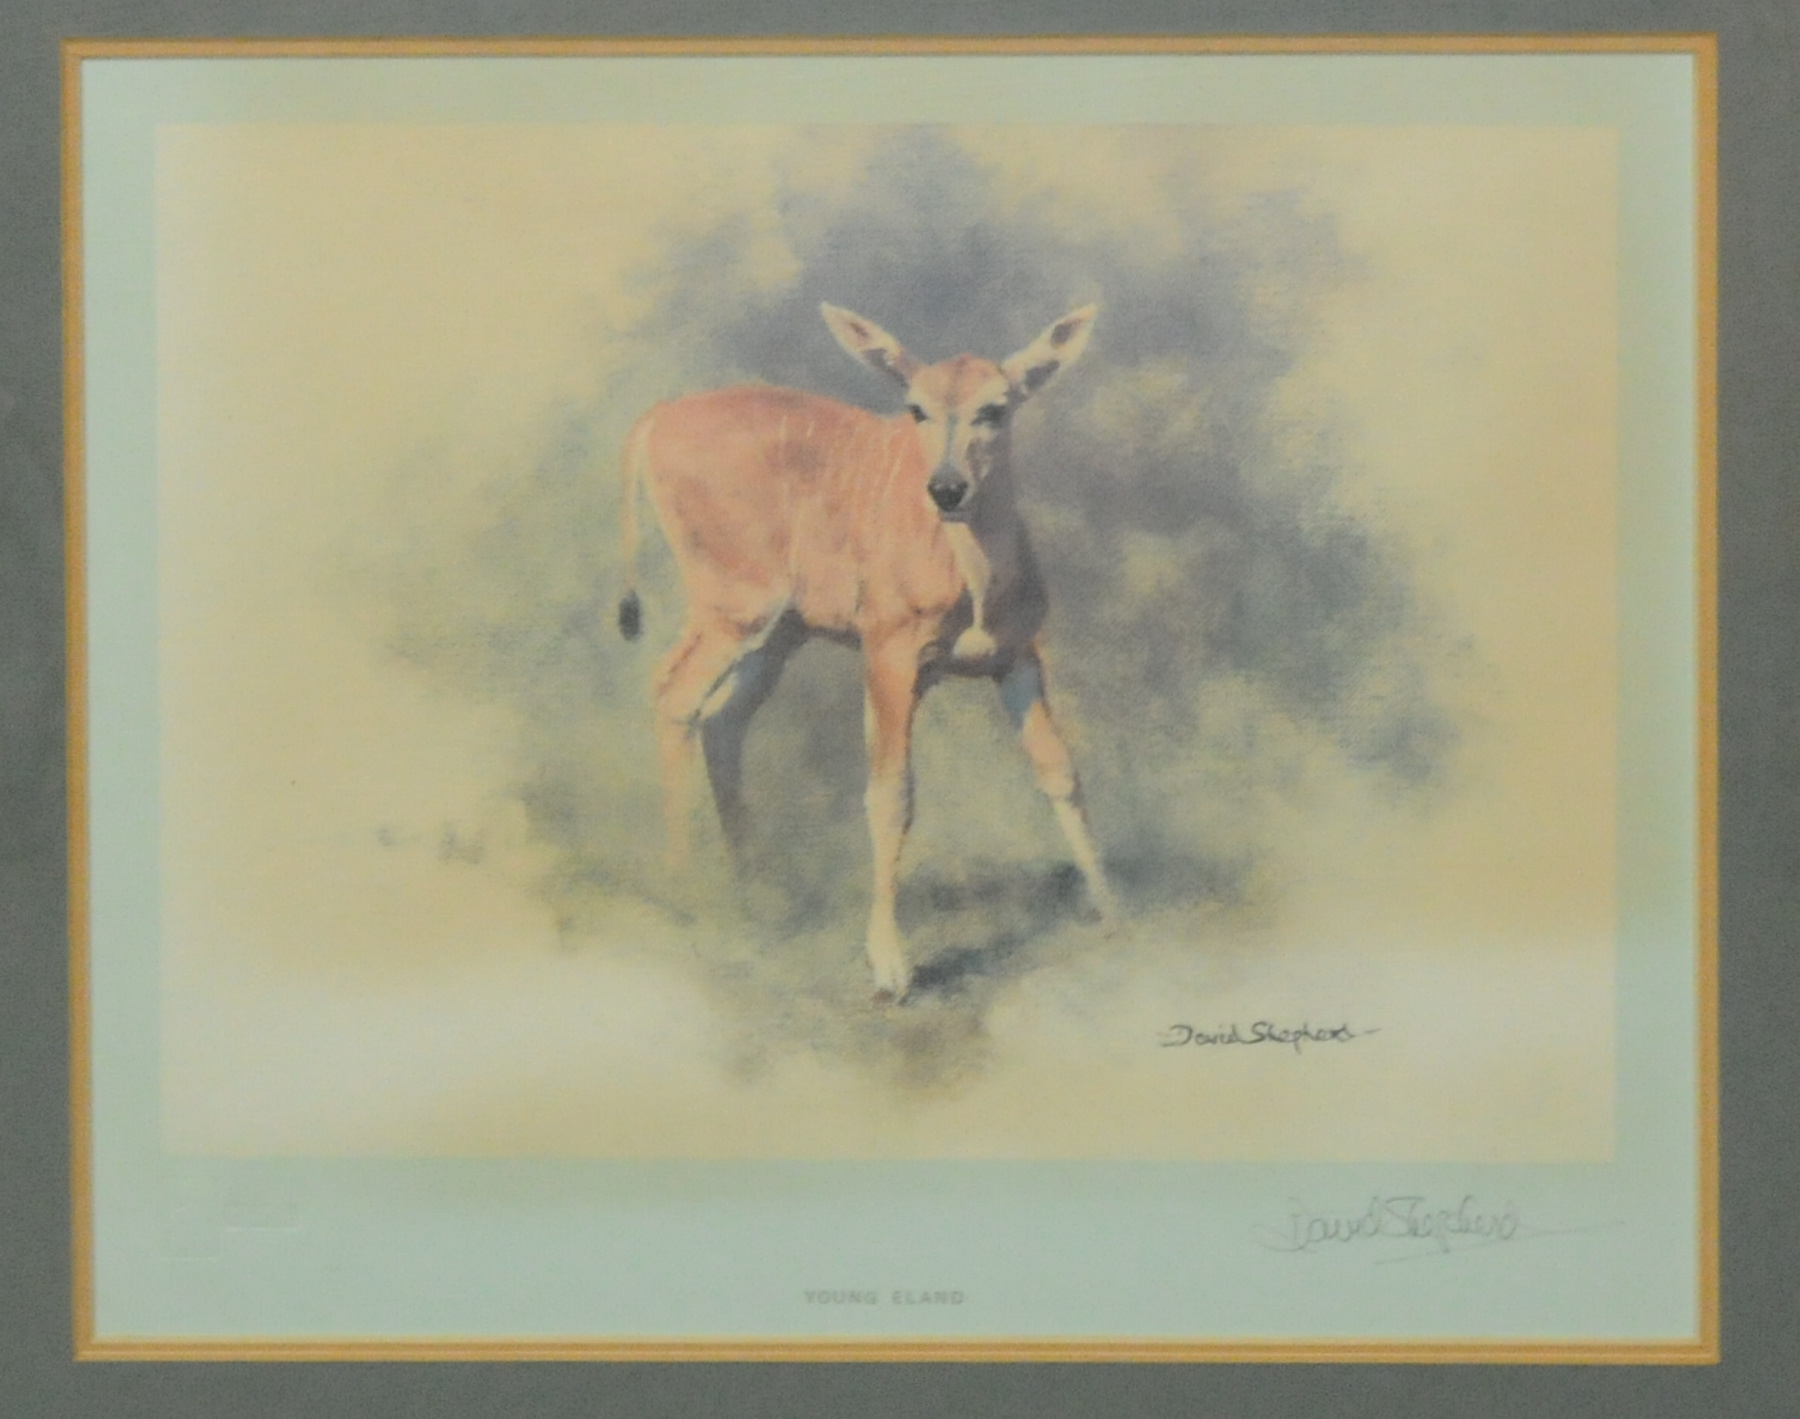 "Young Eland", a colour print after an original by David Shepherd, signed in pencil, 7¼" x 10".